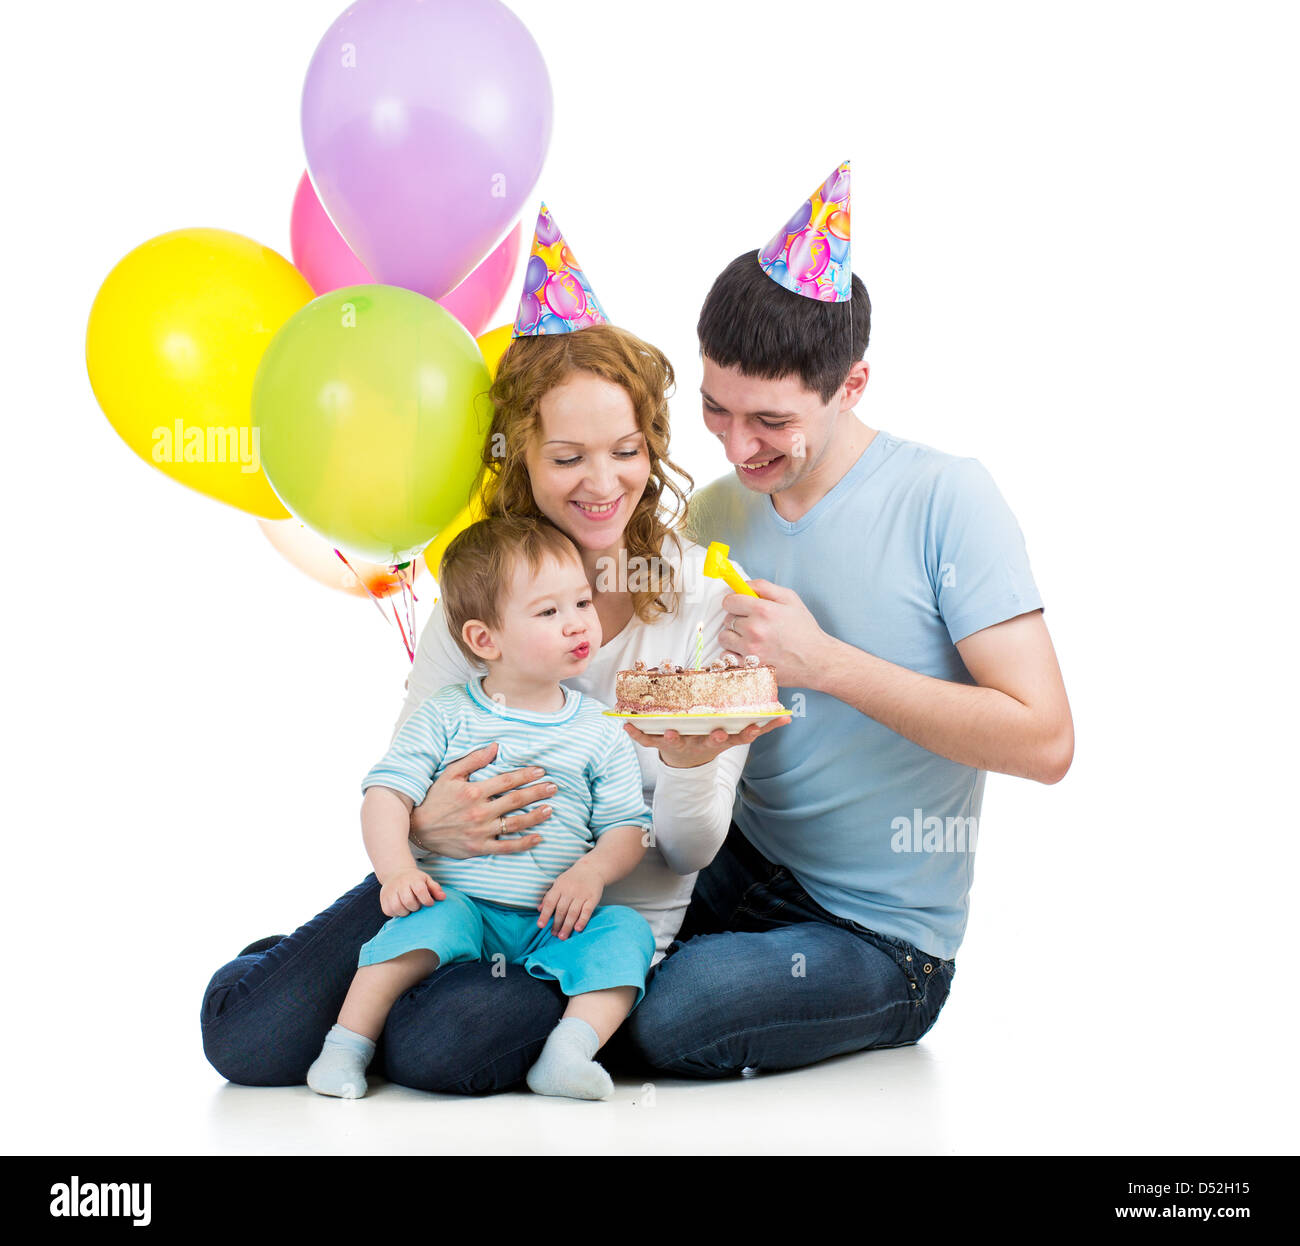 child boy with parents celebrating birthday and blowing candles on cake Stock Photo